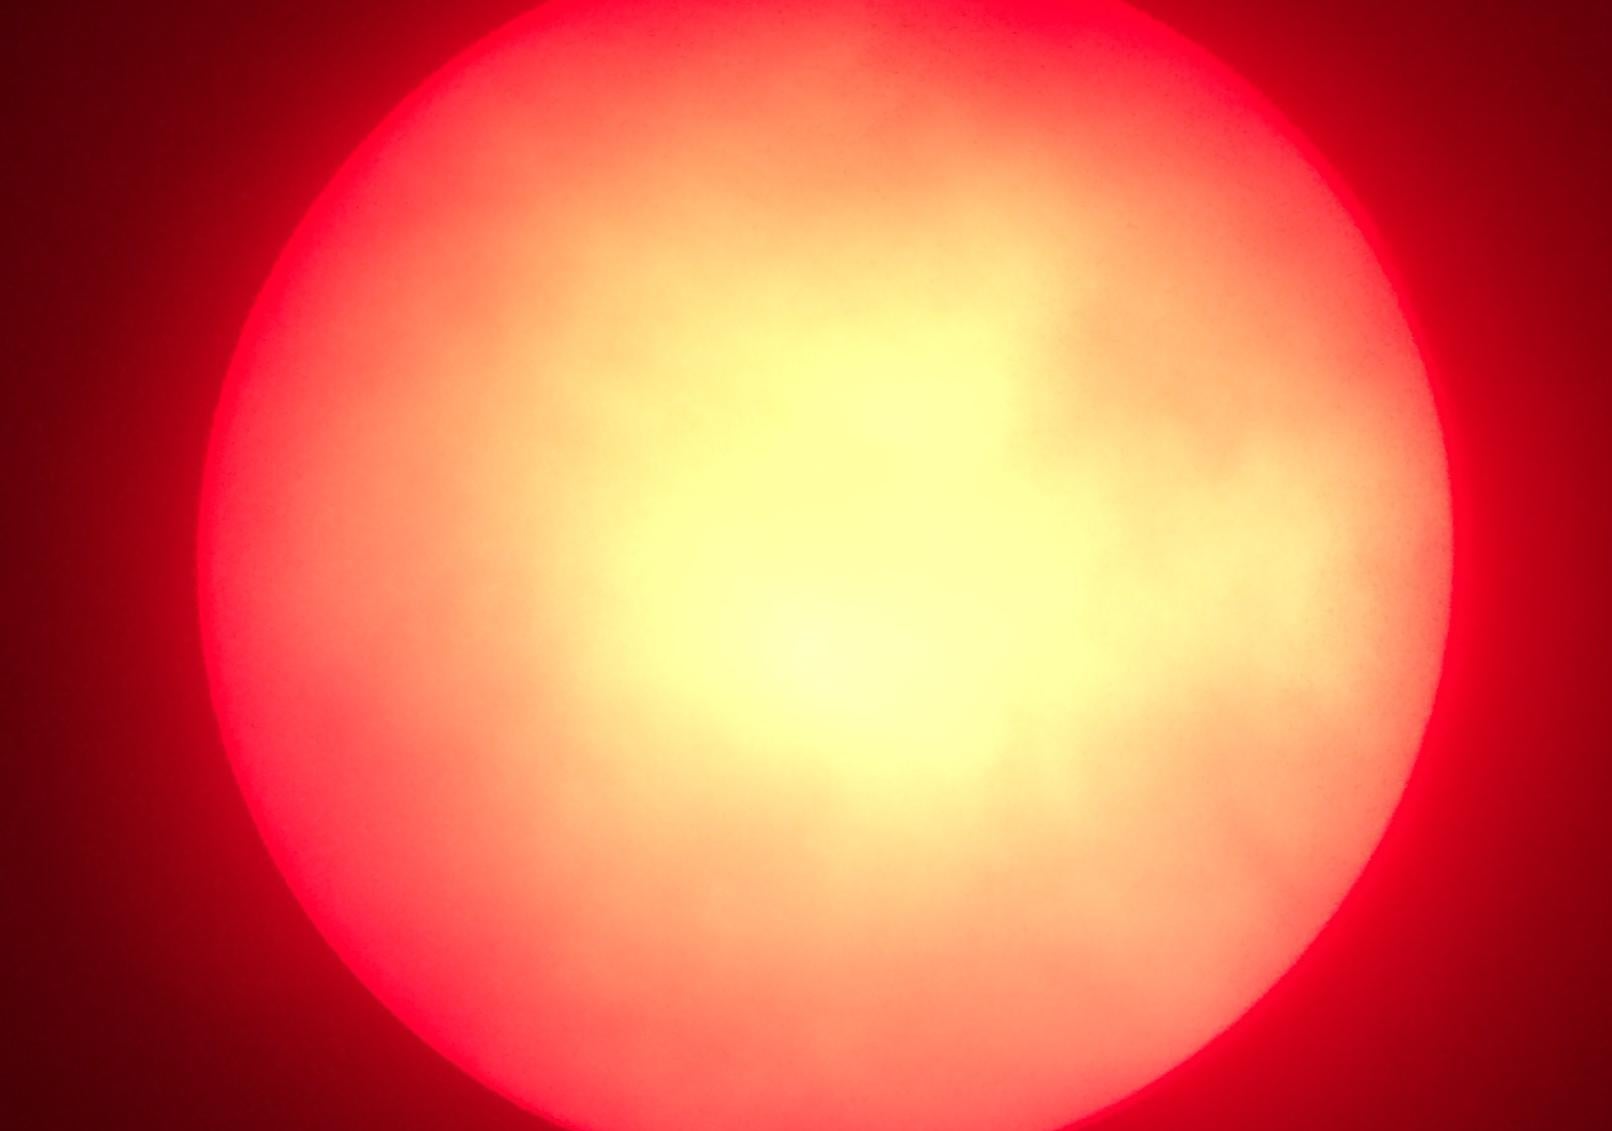 View of the Sun